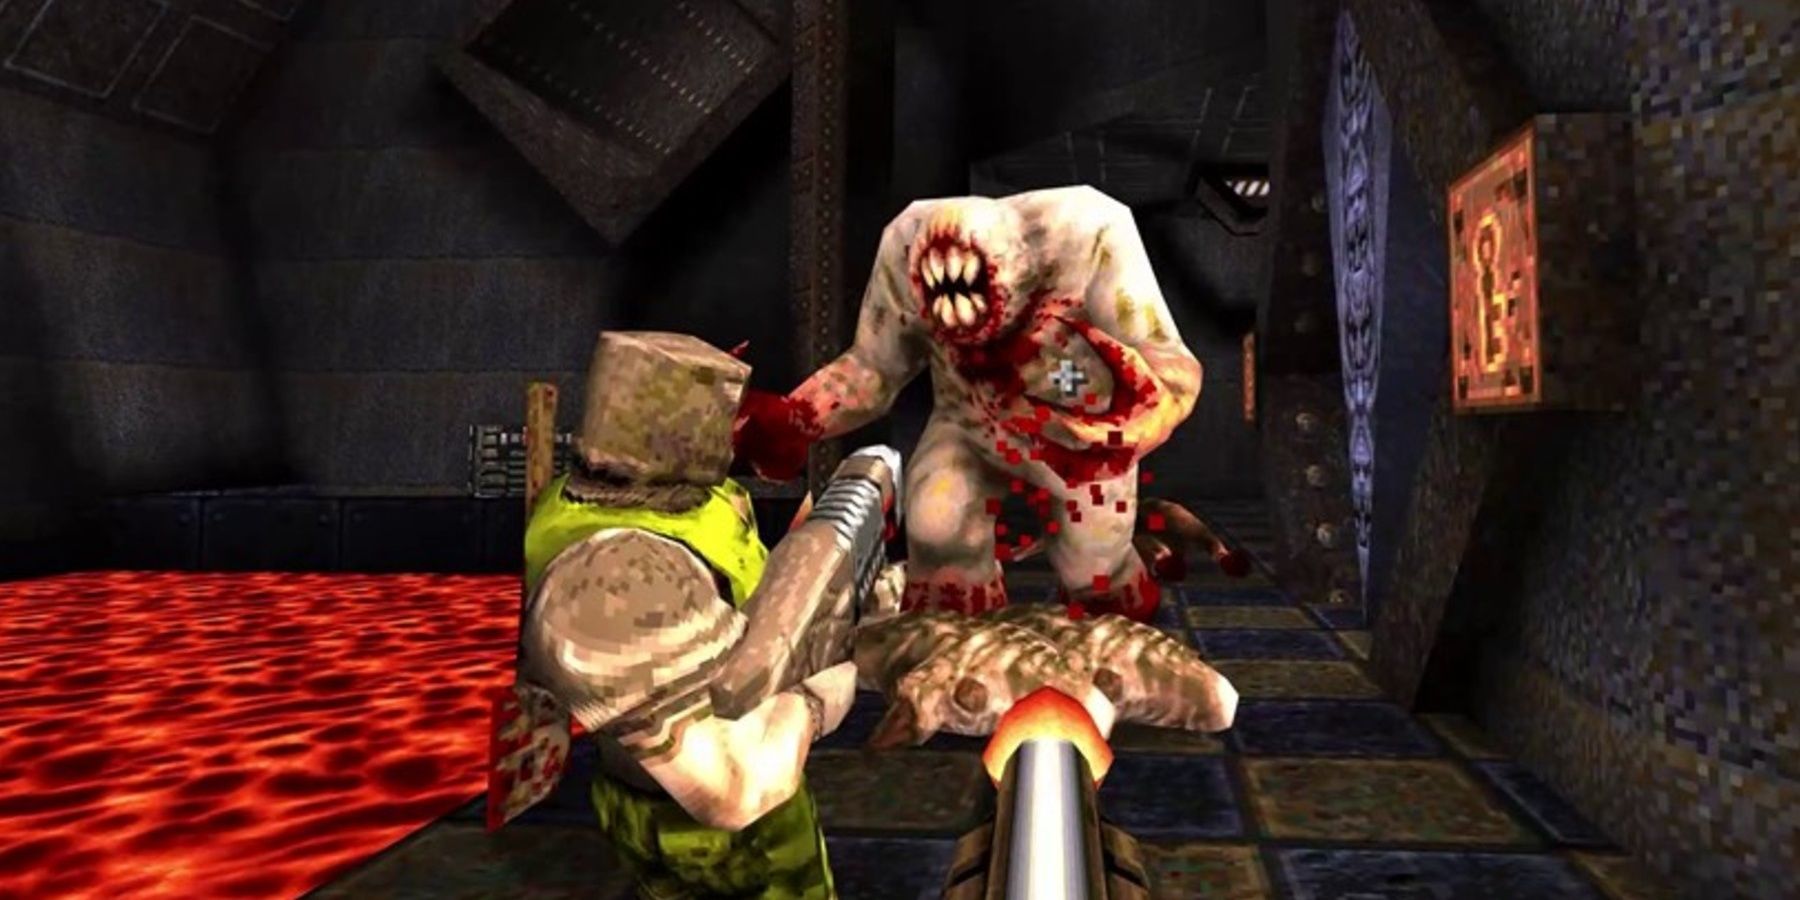 Quake battling an ogre in a room with lava